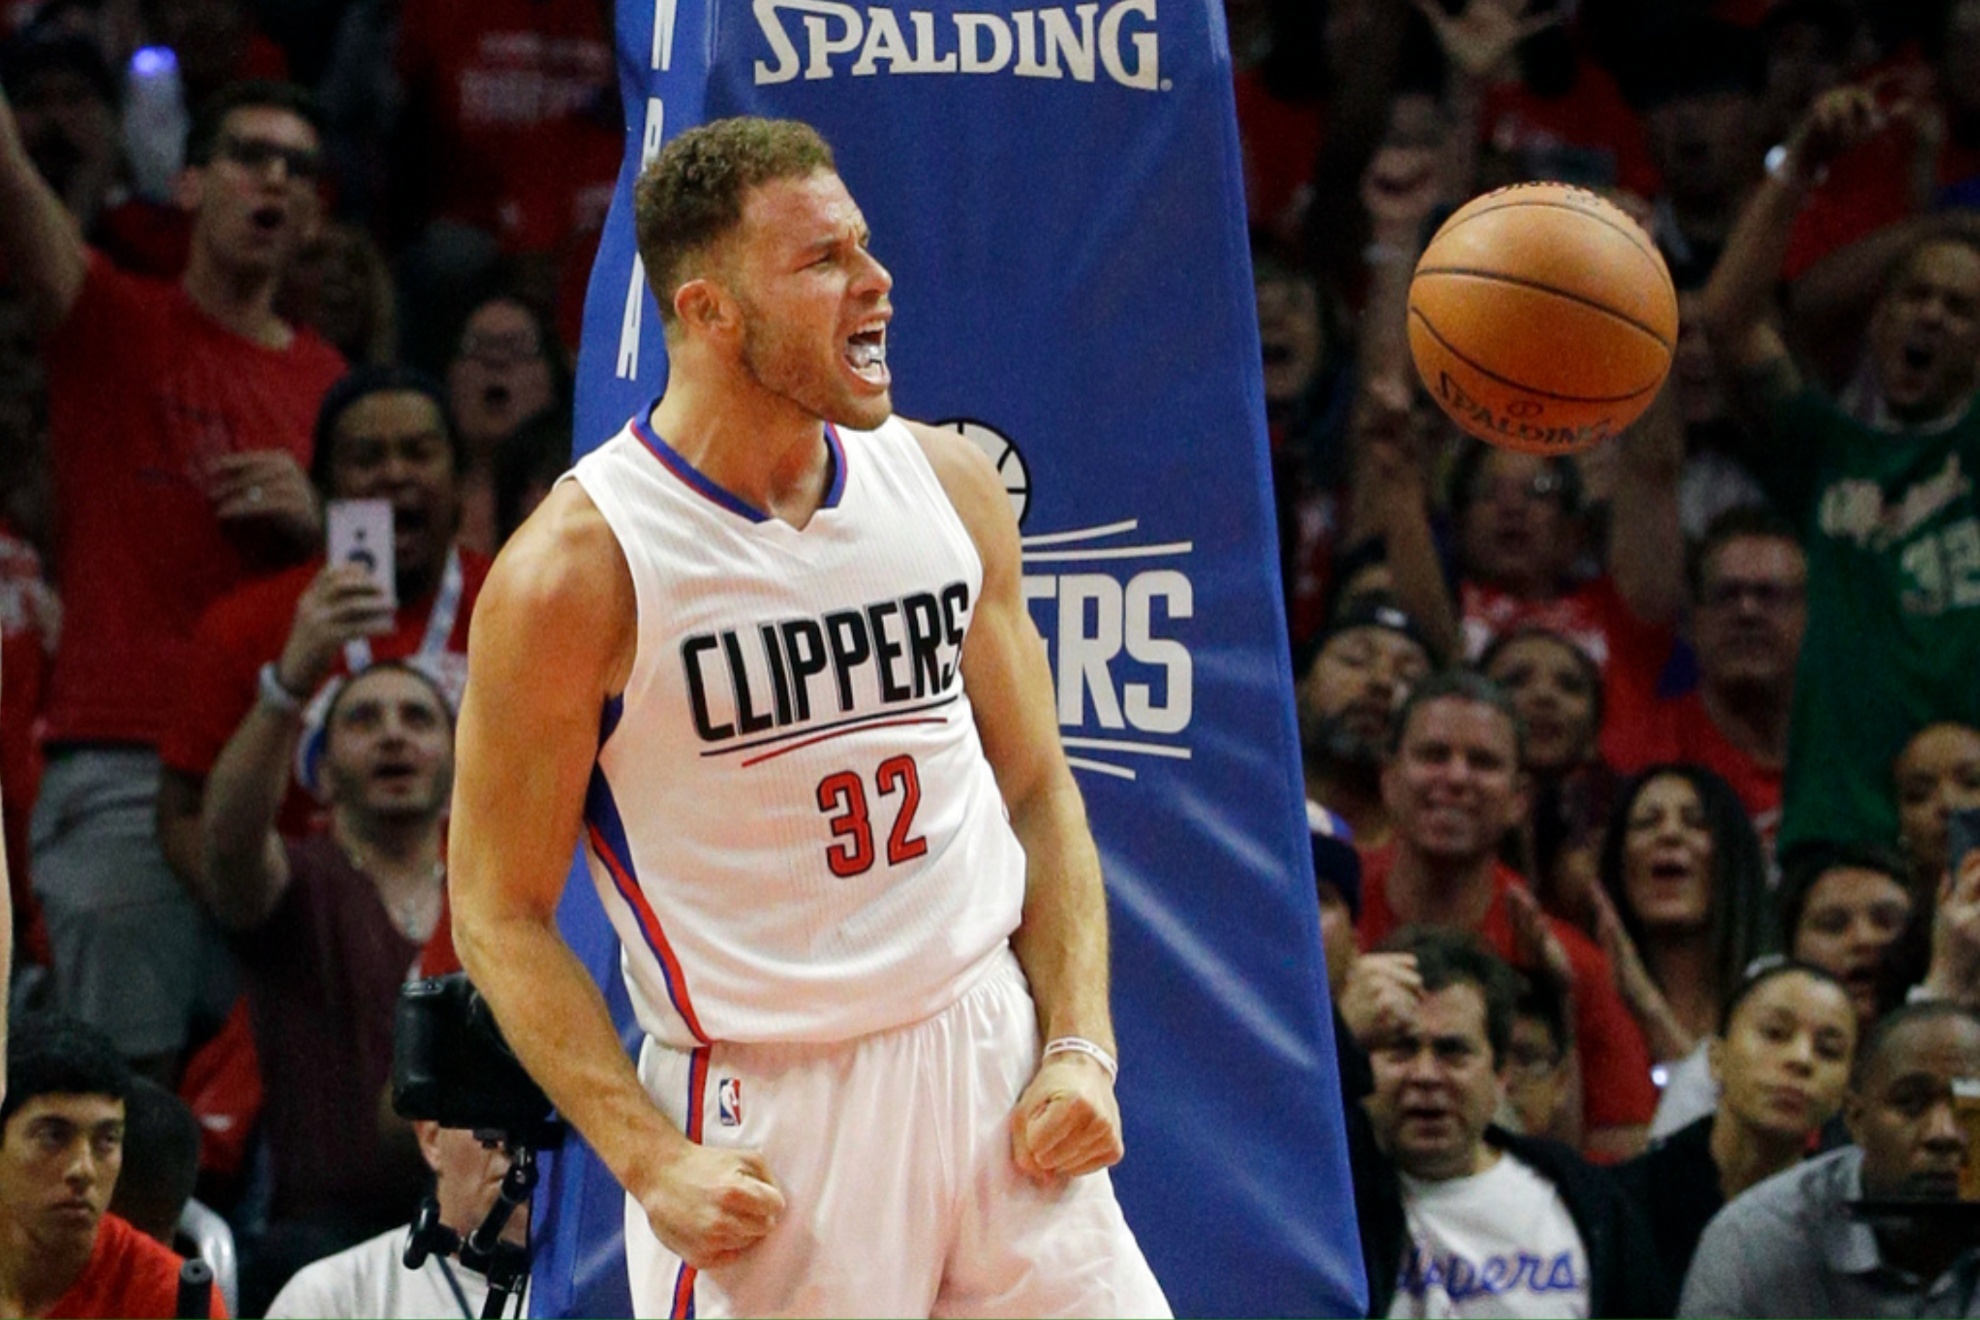 Blake Griffin retired from the NBA after 14 seasons